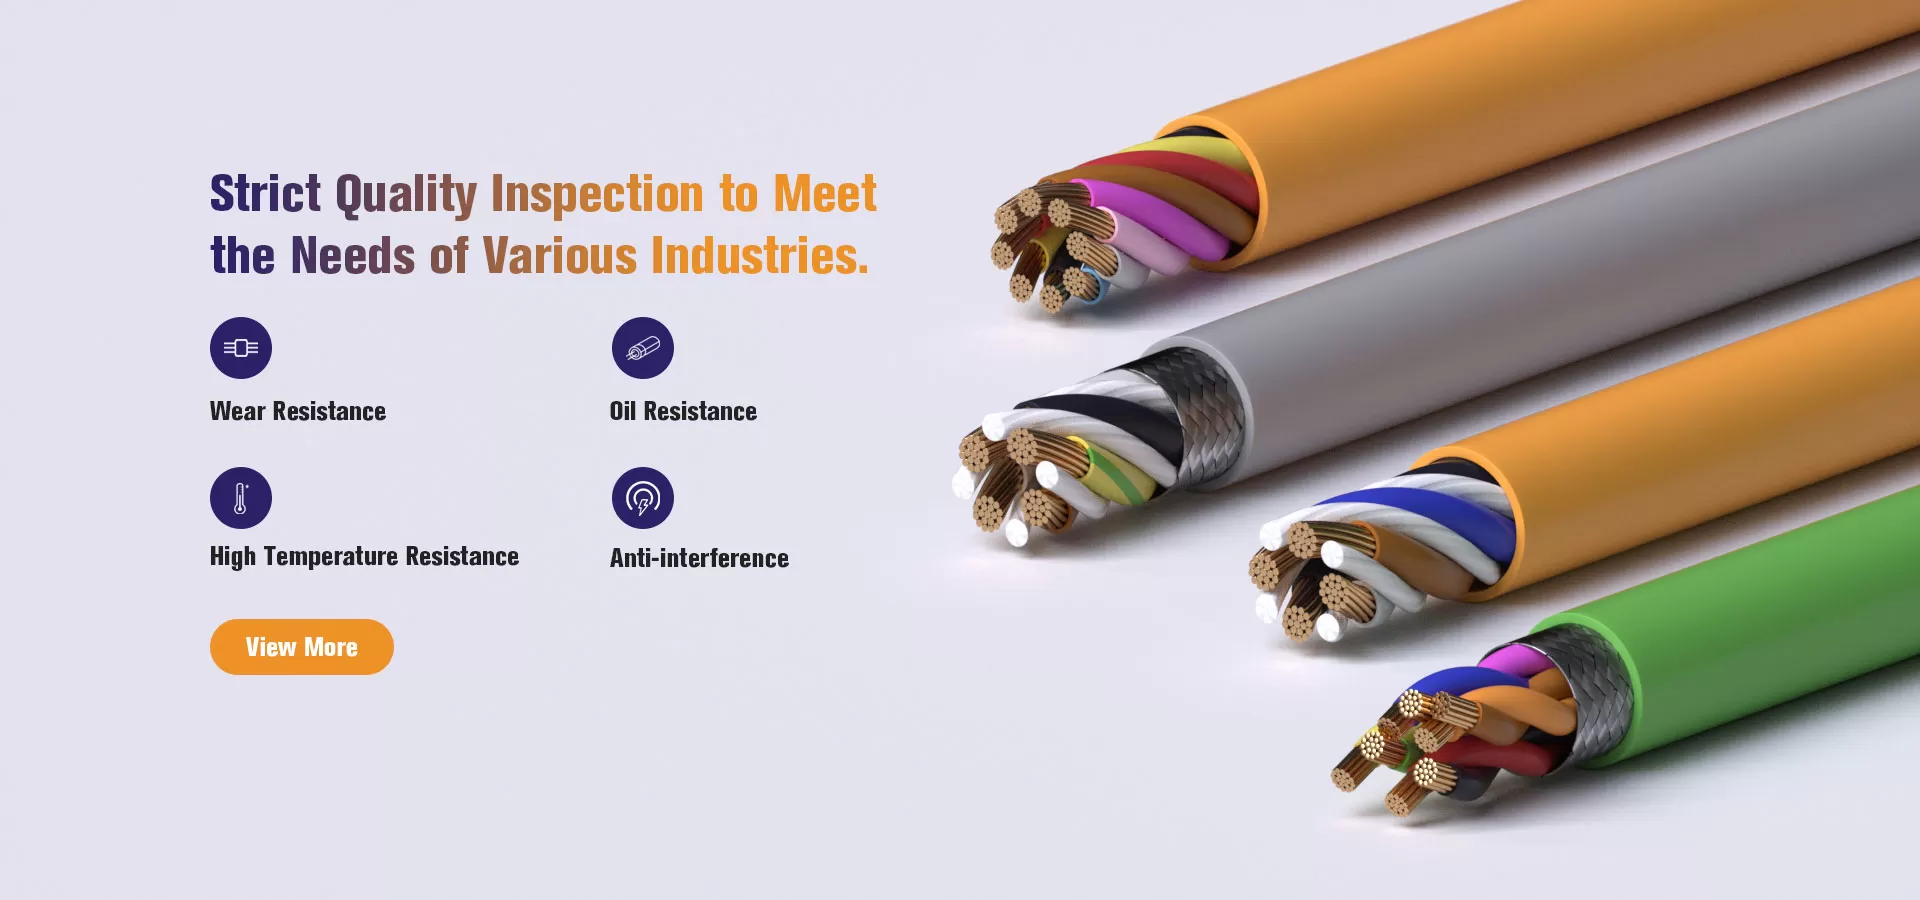 Strict Quality Inspection to Meet the Needs of Various Industries